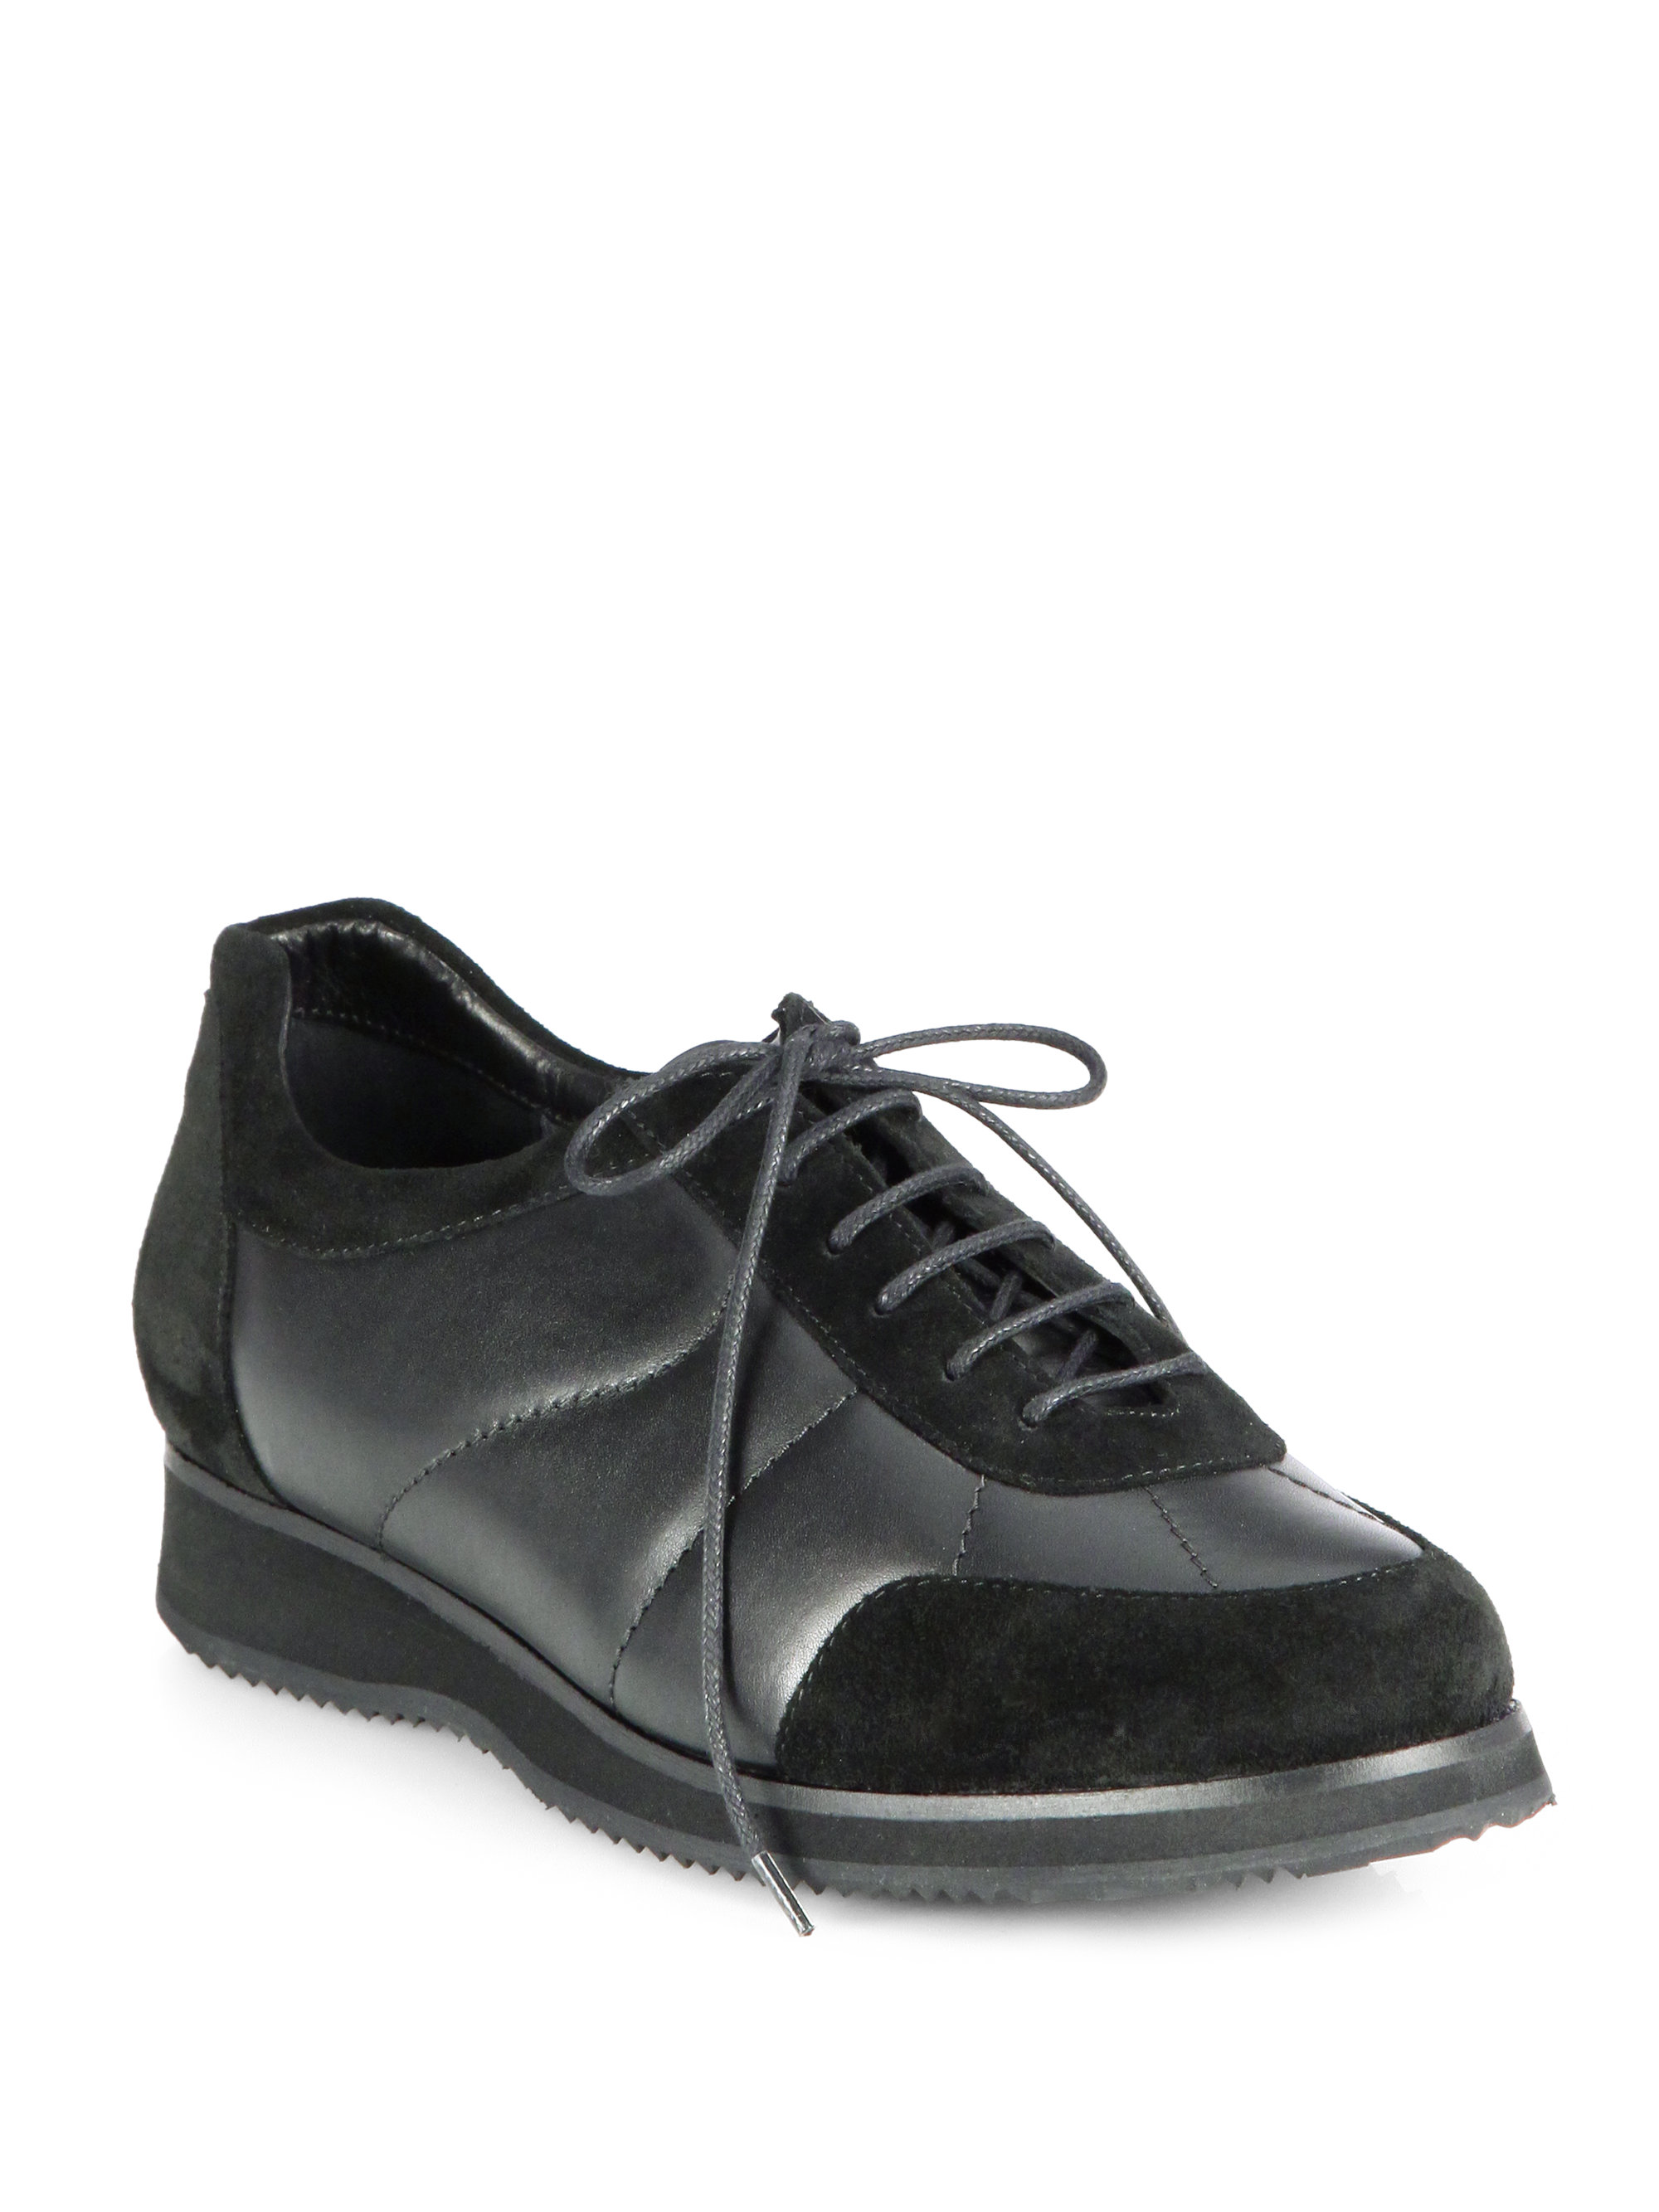 Aquatalia By Marvin K Wet Leather and Suede Laceup Sneaker in Black | Lyst